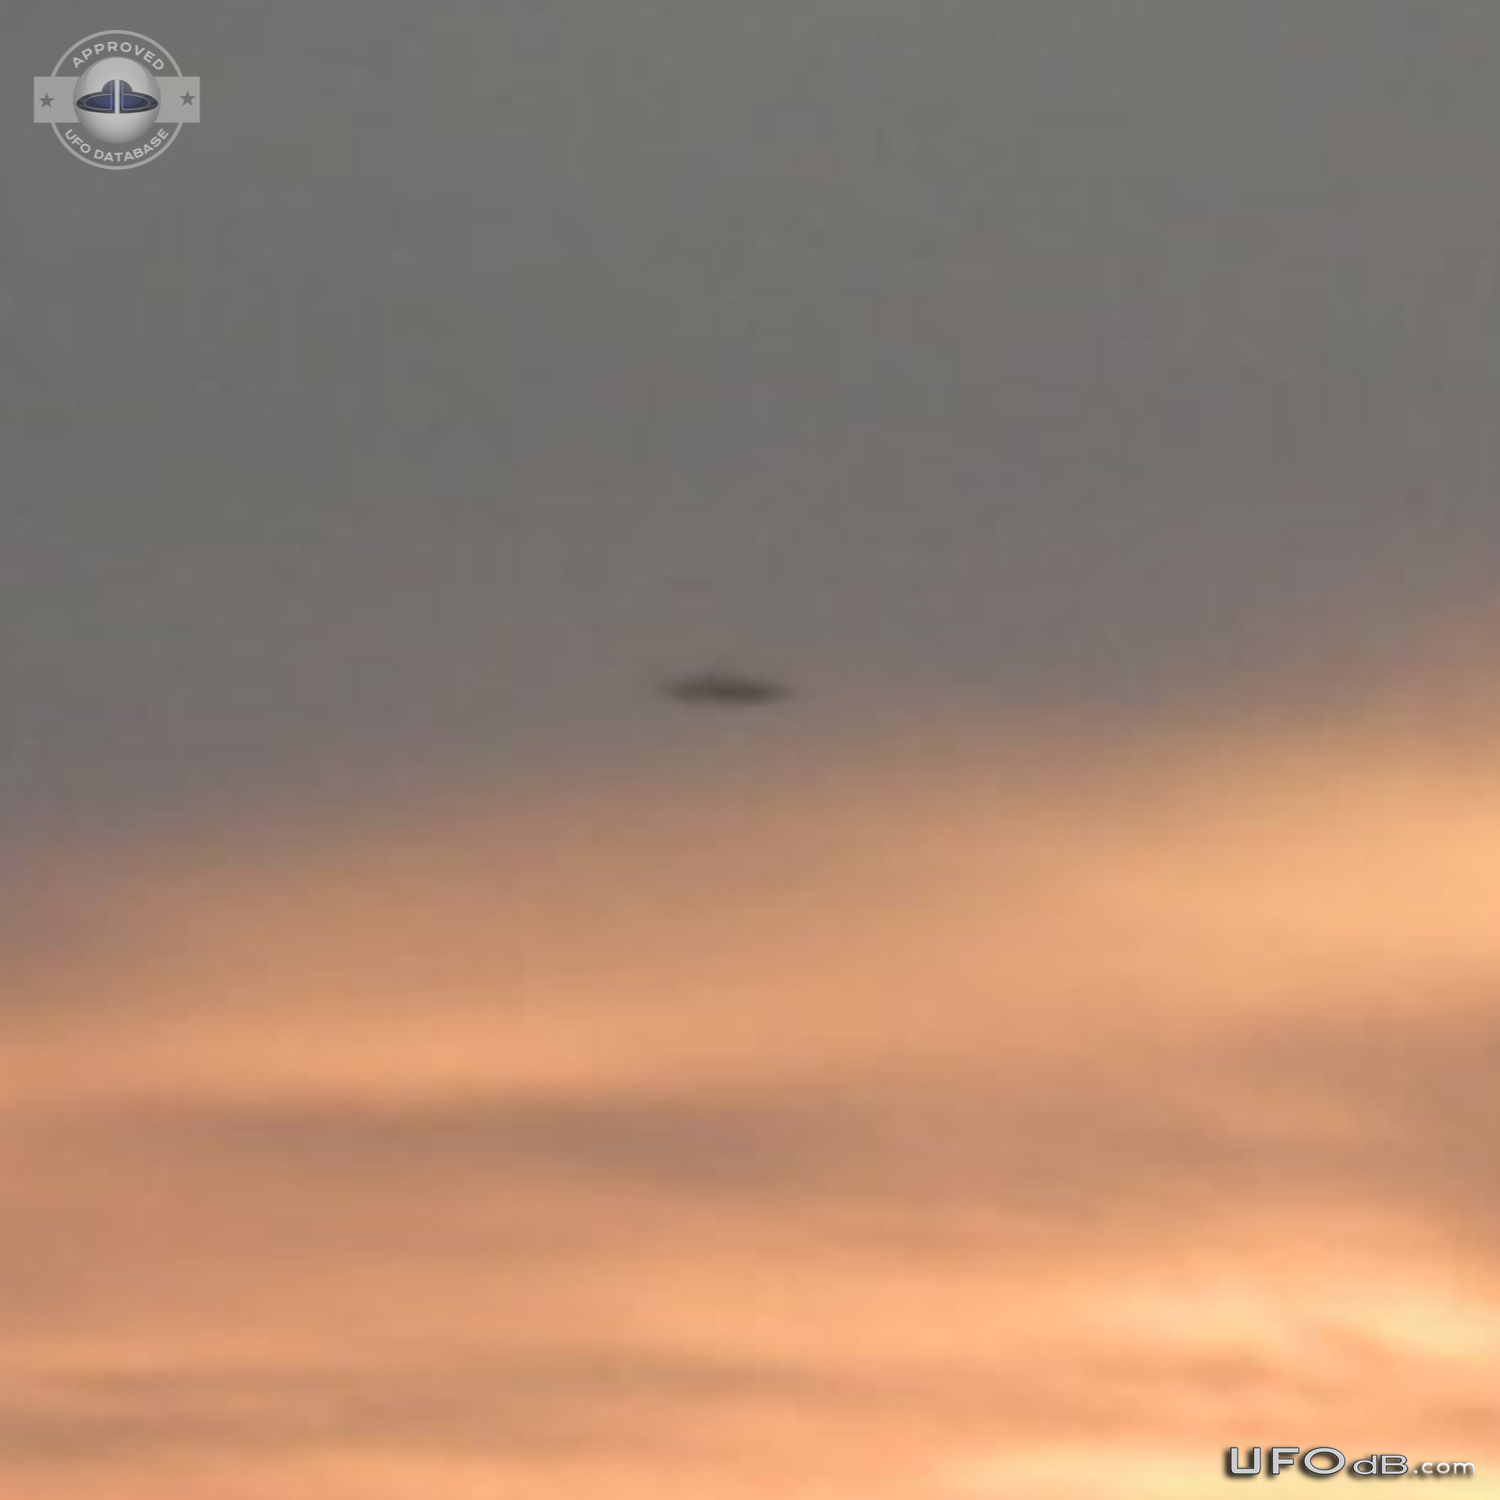 UFO saucer caught on picture - Lost River, West Virginia USA 2013 UFO Picture #616-4